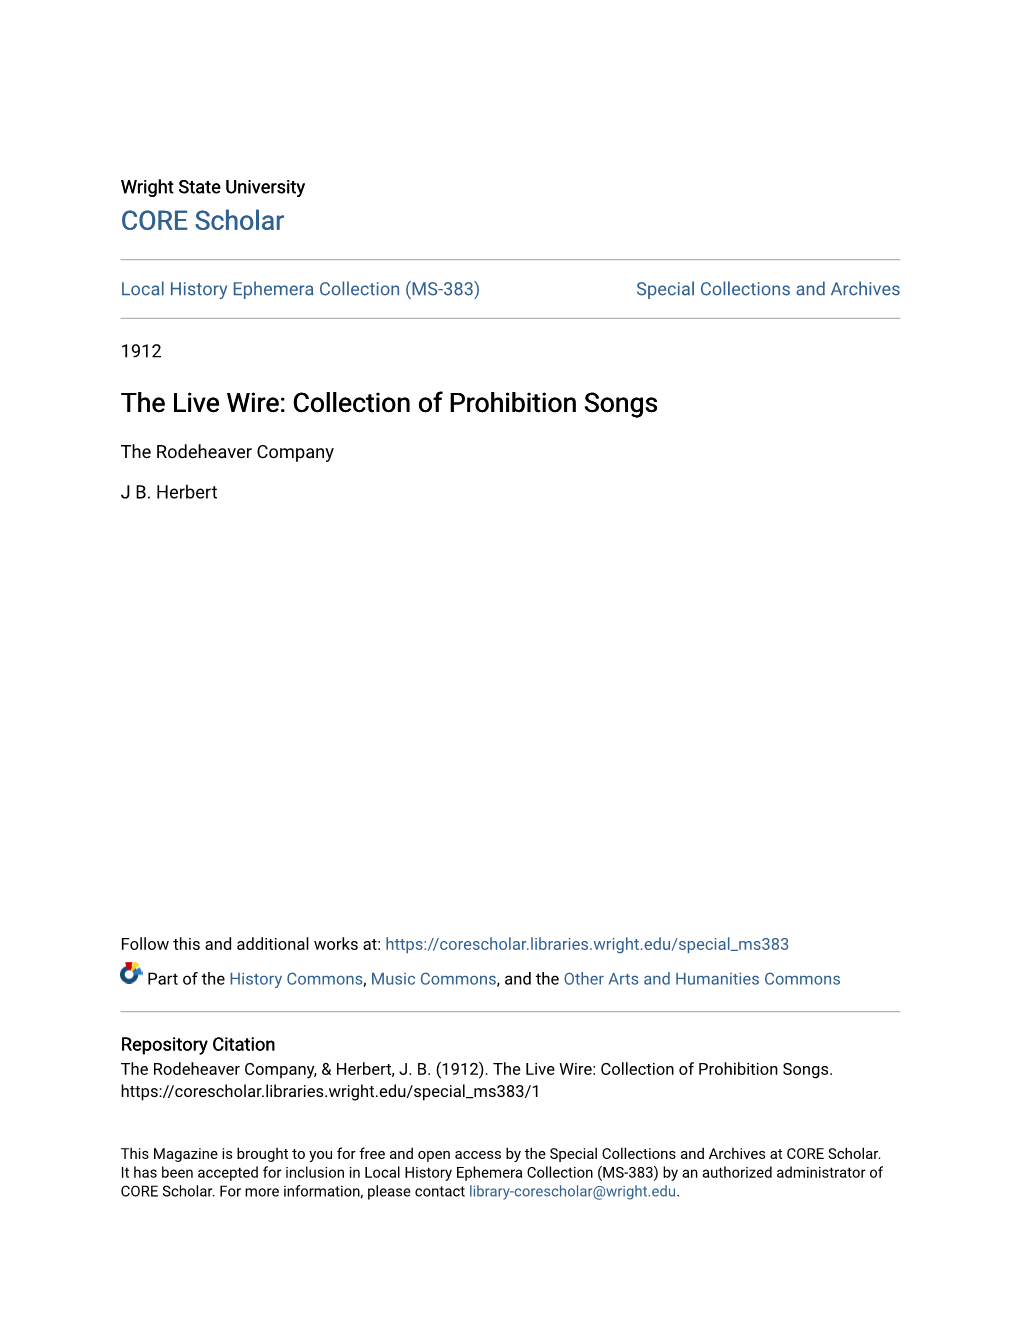 The Live Wire: Collection of Prohibition Songs